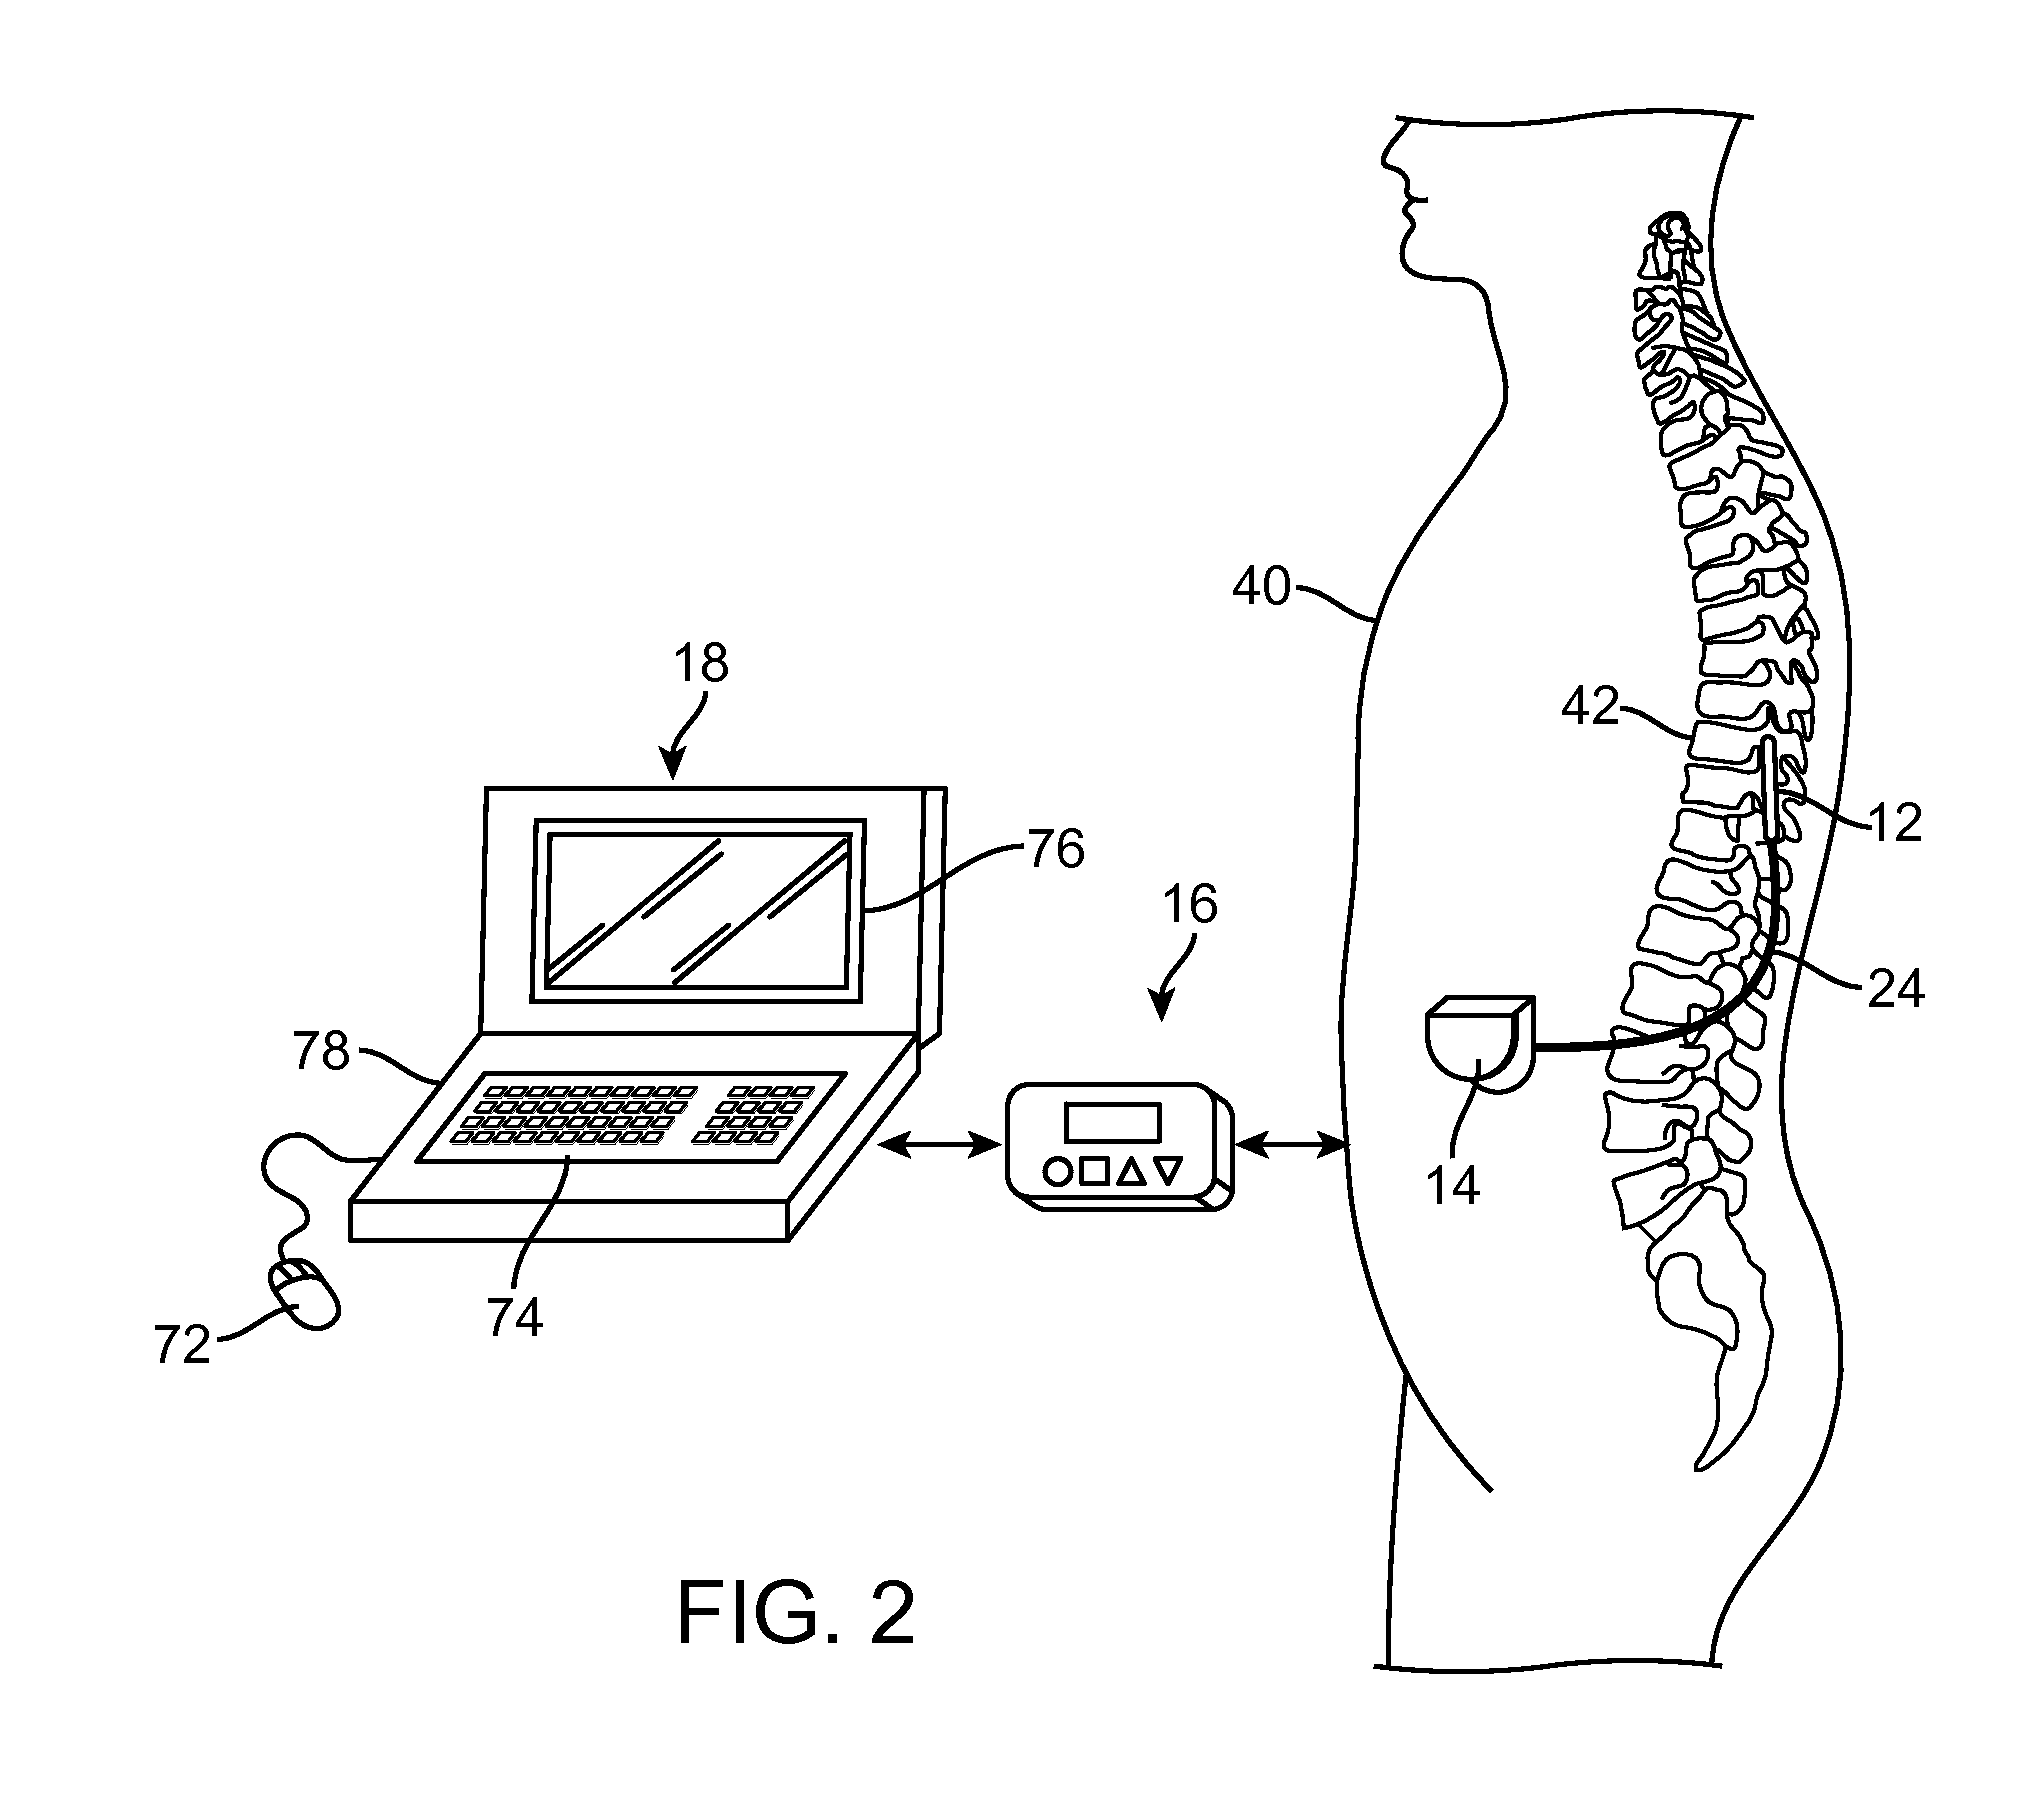 Neurostimulation system for defining a generalized ideal multipole configuration